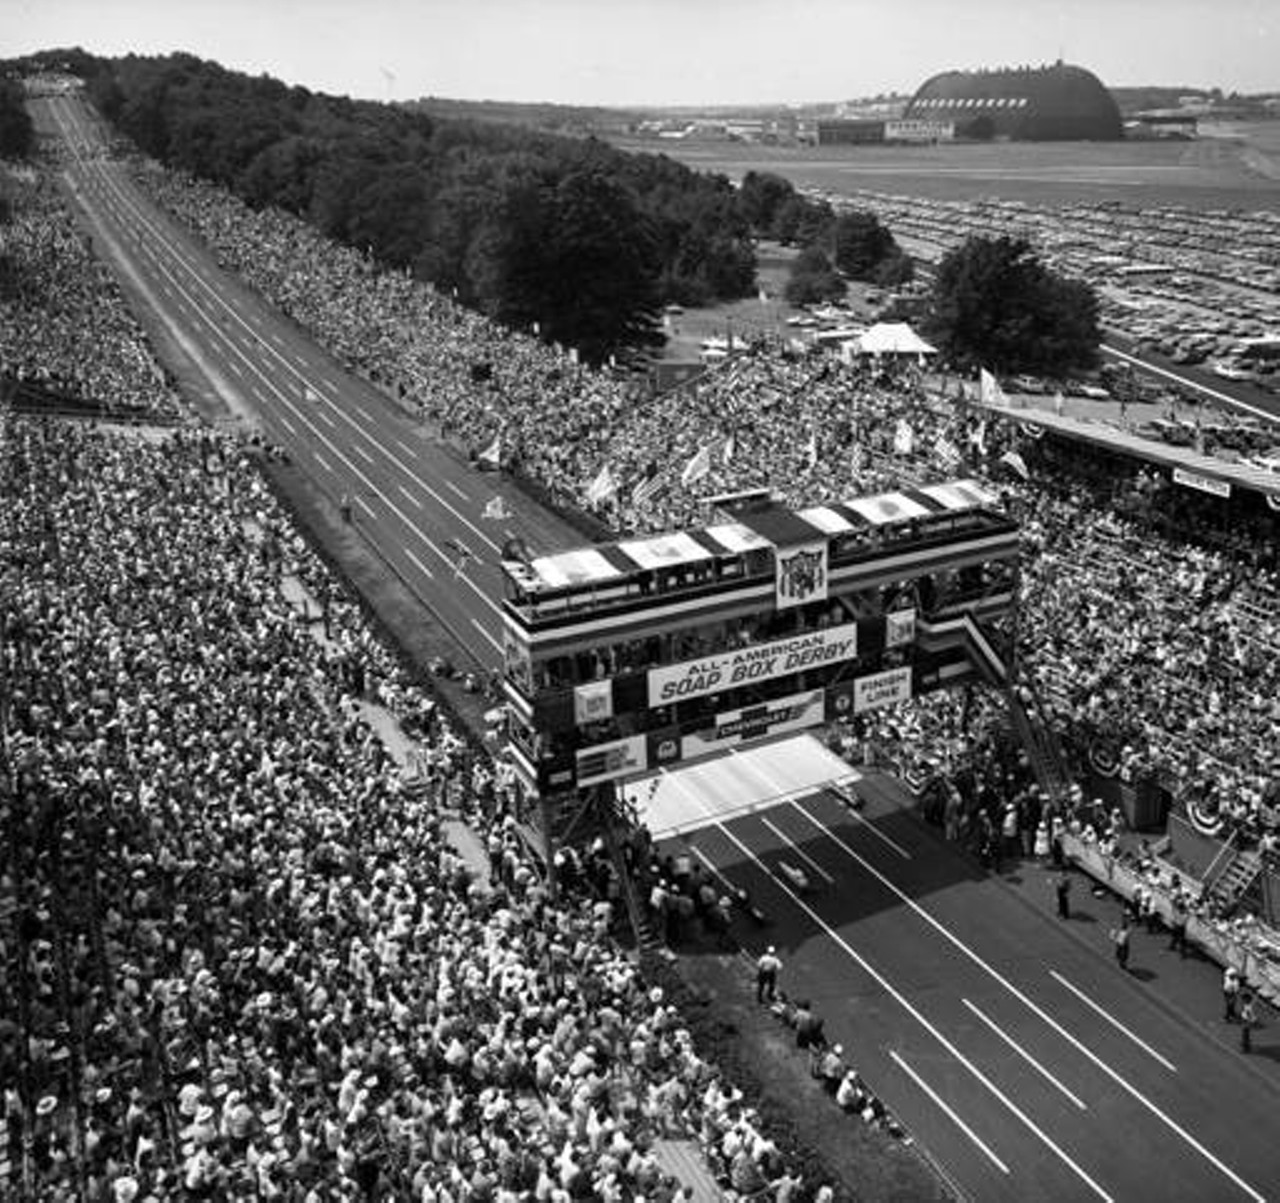 Finish line at the All-American Soap Box Derby in 1971.